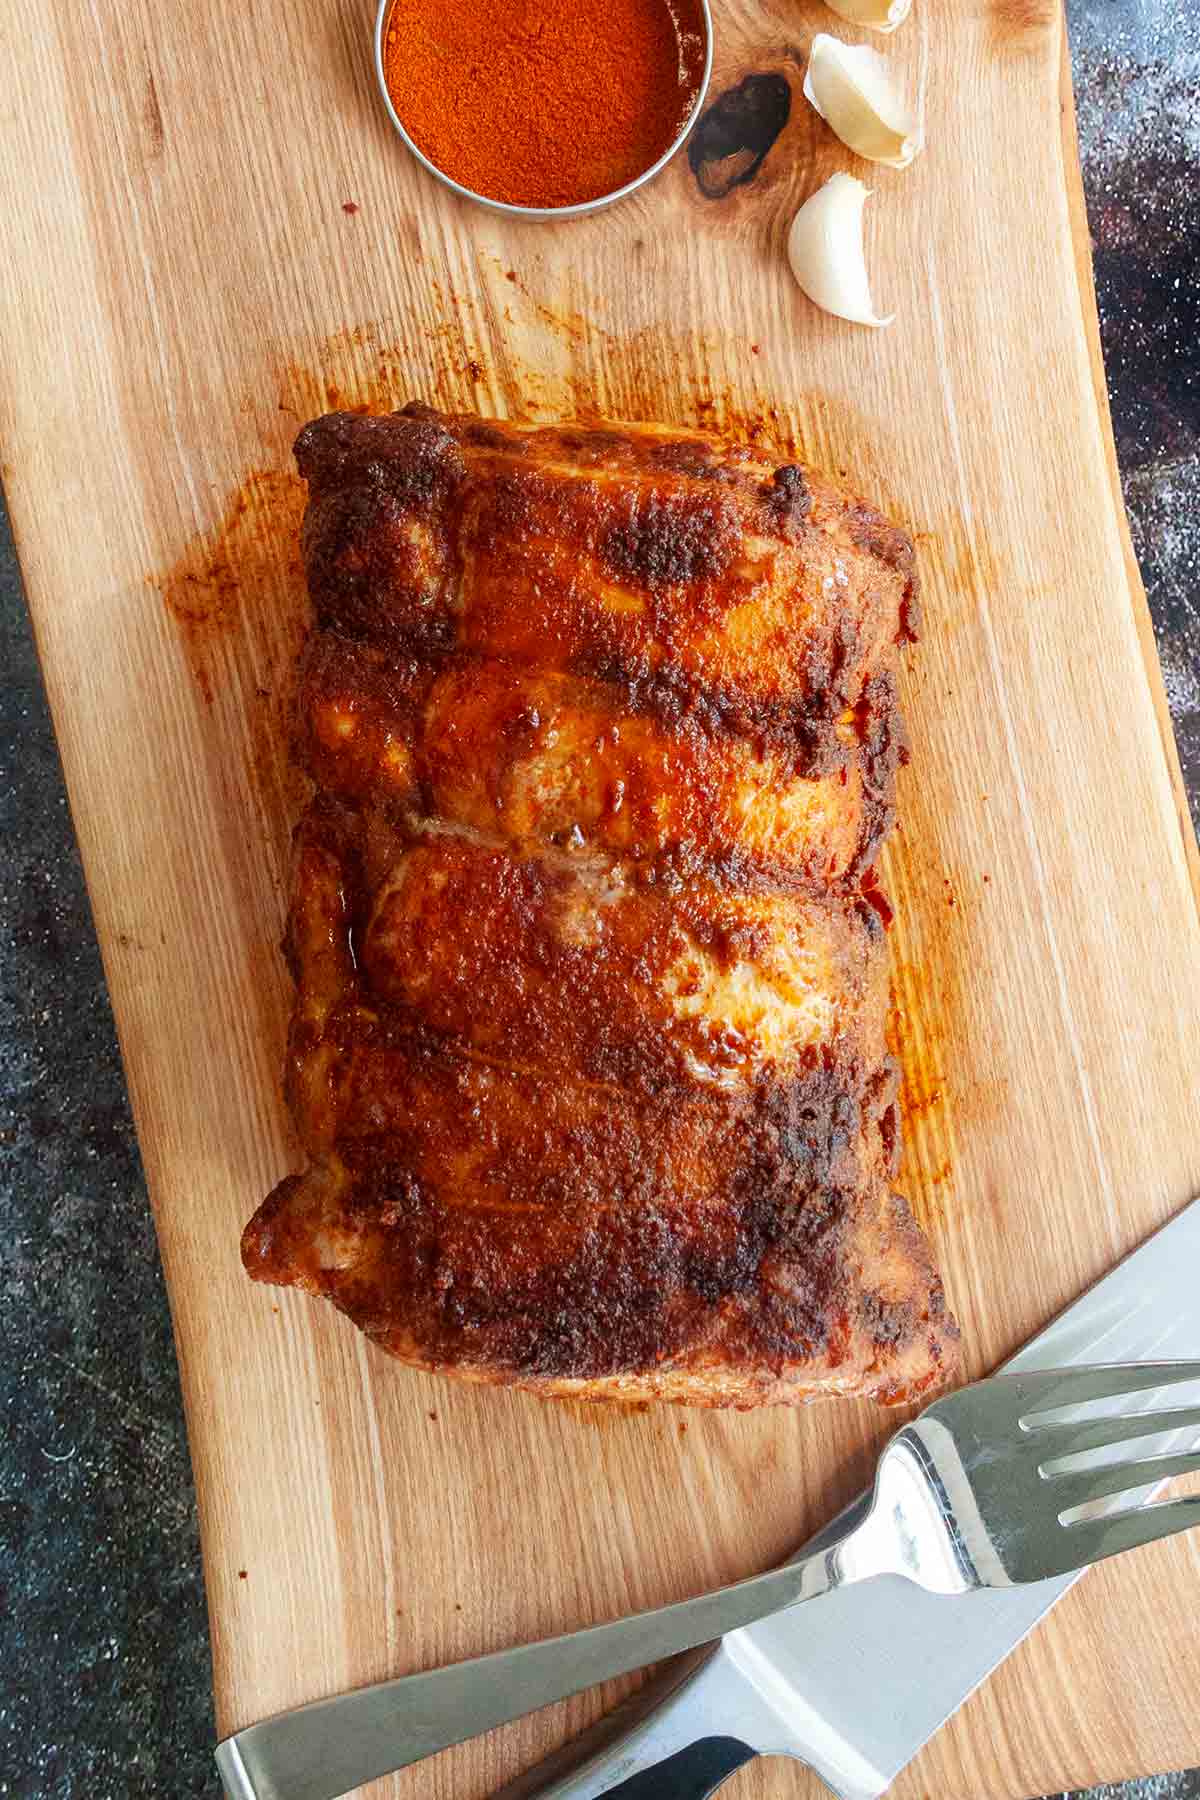 A Spanish pork loin roast on a cutting board with a carving knife and fork next to it.